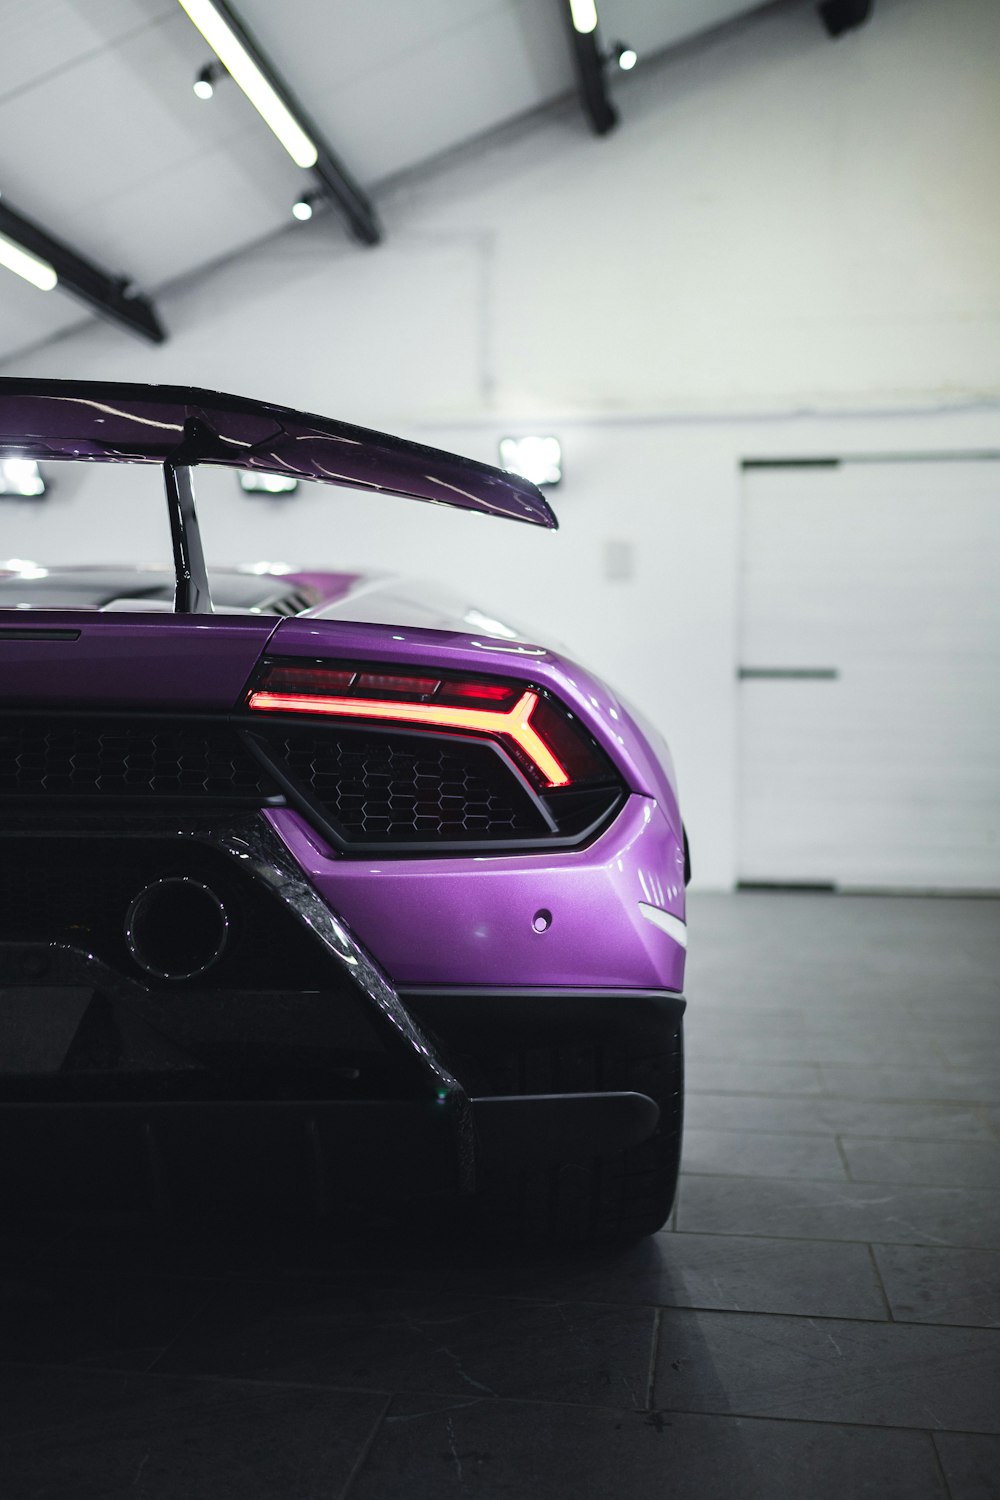 purple and black car in a room